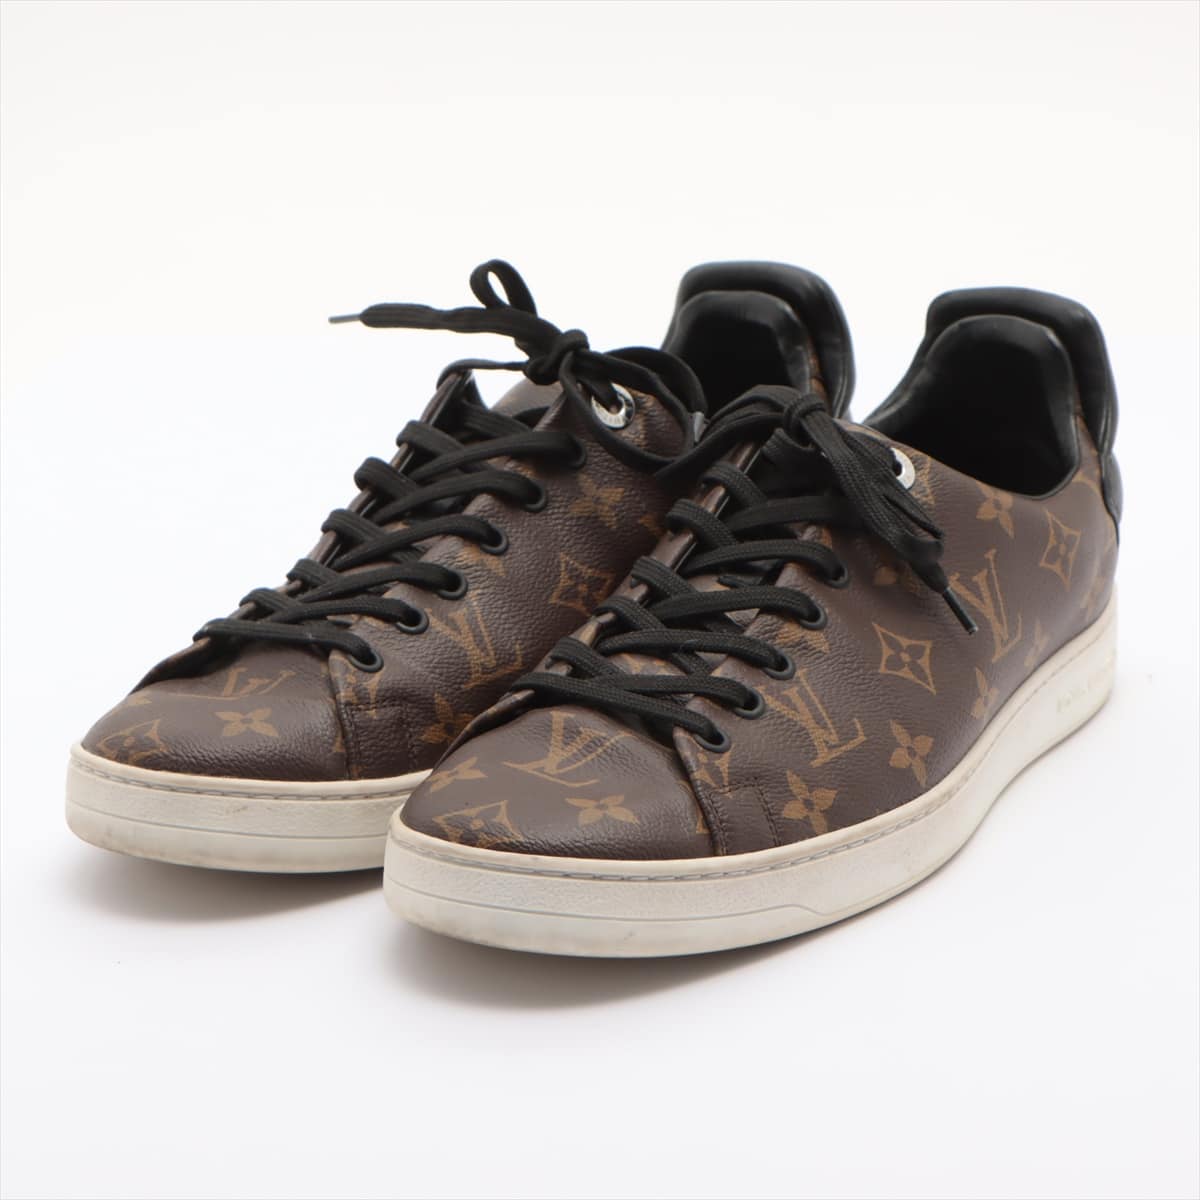 Louis Vuitton Front low line 16 years Leather Sneakers Unknown size Men's Brown MS0116 Monogram